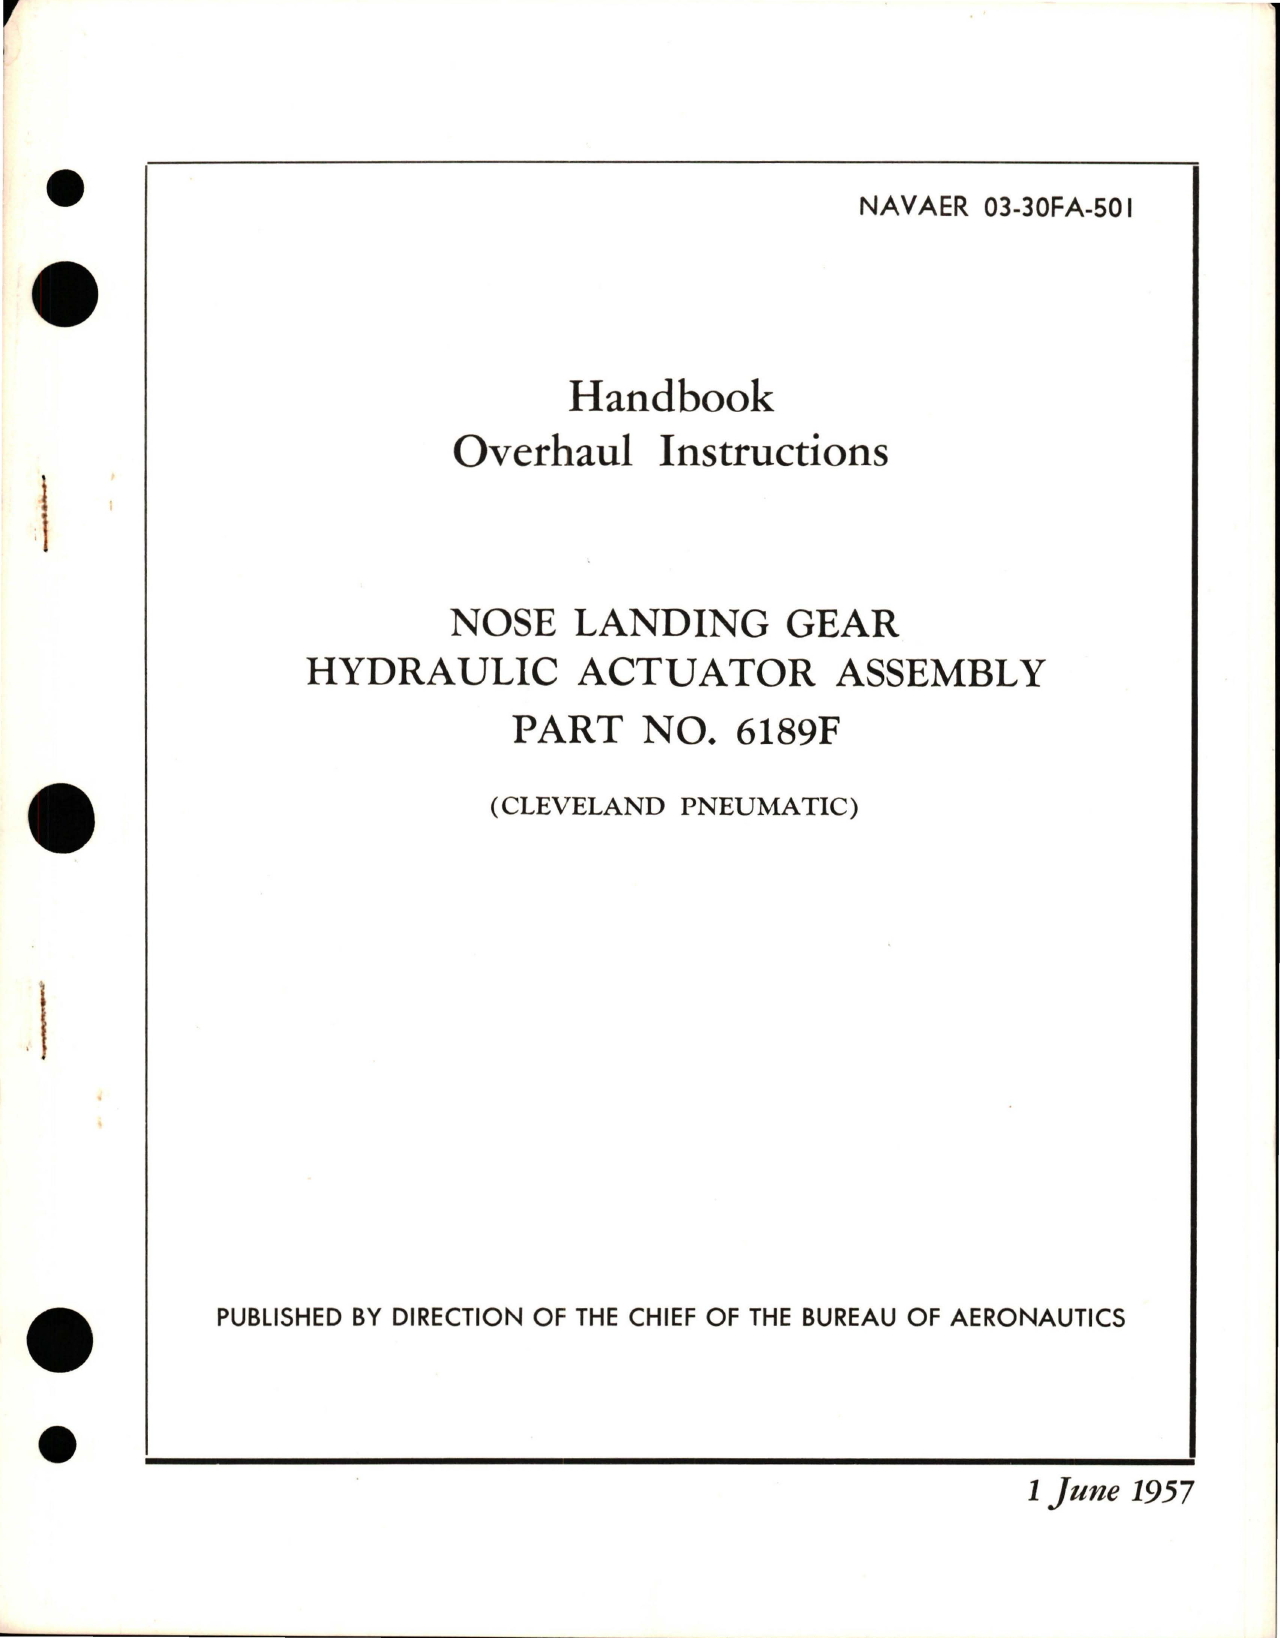 Sample page 1 from AirCorps Library document: Overhaul Instructions for Nose Landing Gear Hydraulic Actuator Assembly - Part 6189F 